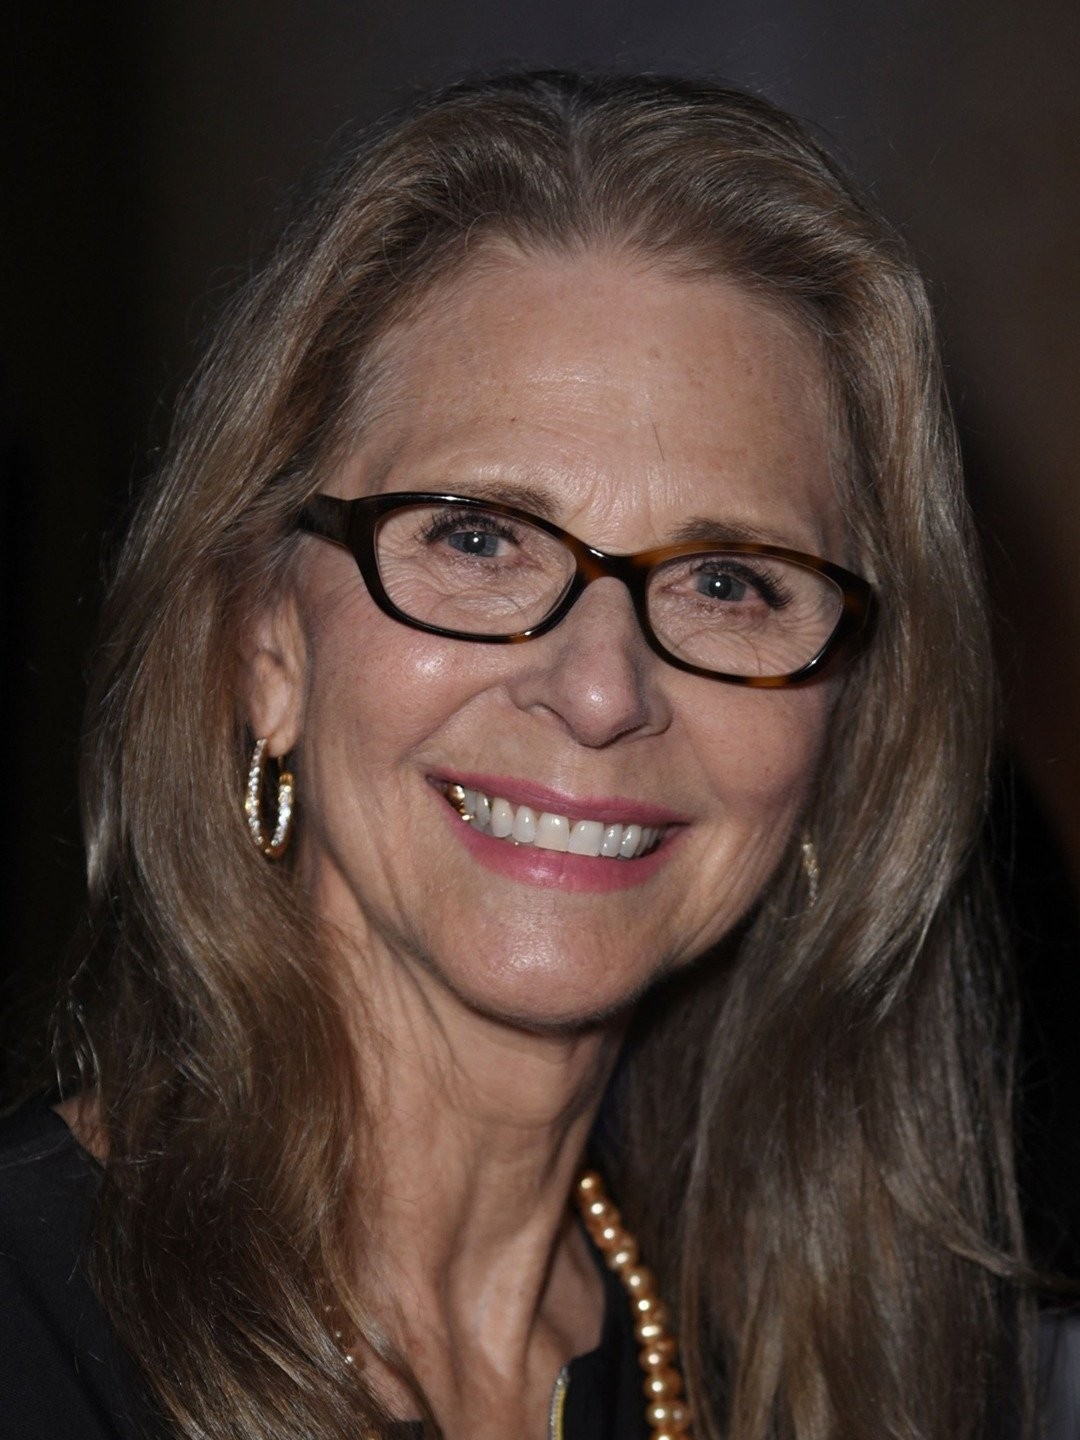 Lindsay Wagner Played The Bionic Woman. See Her Now at 72.